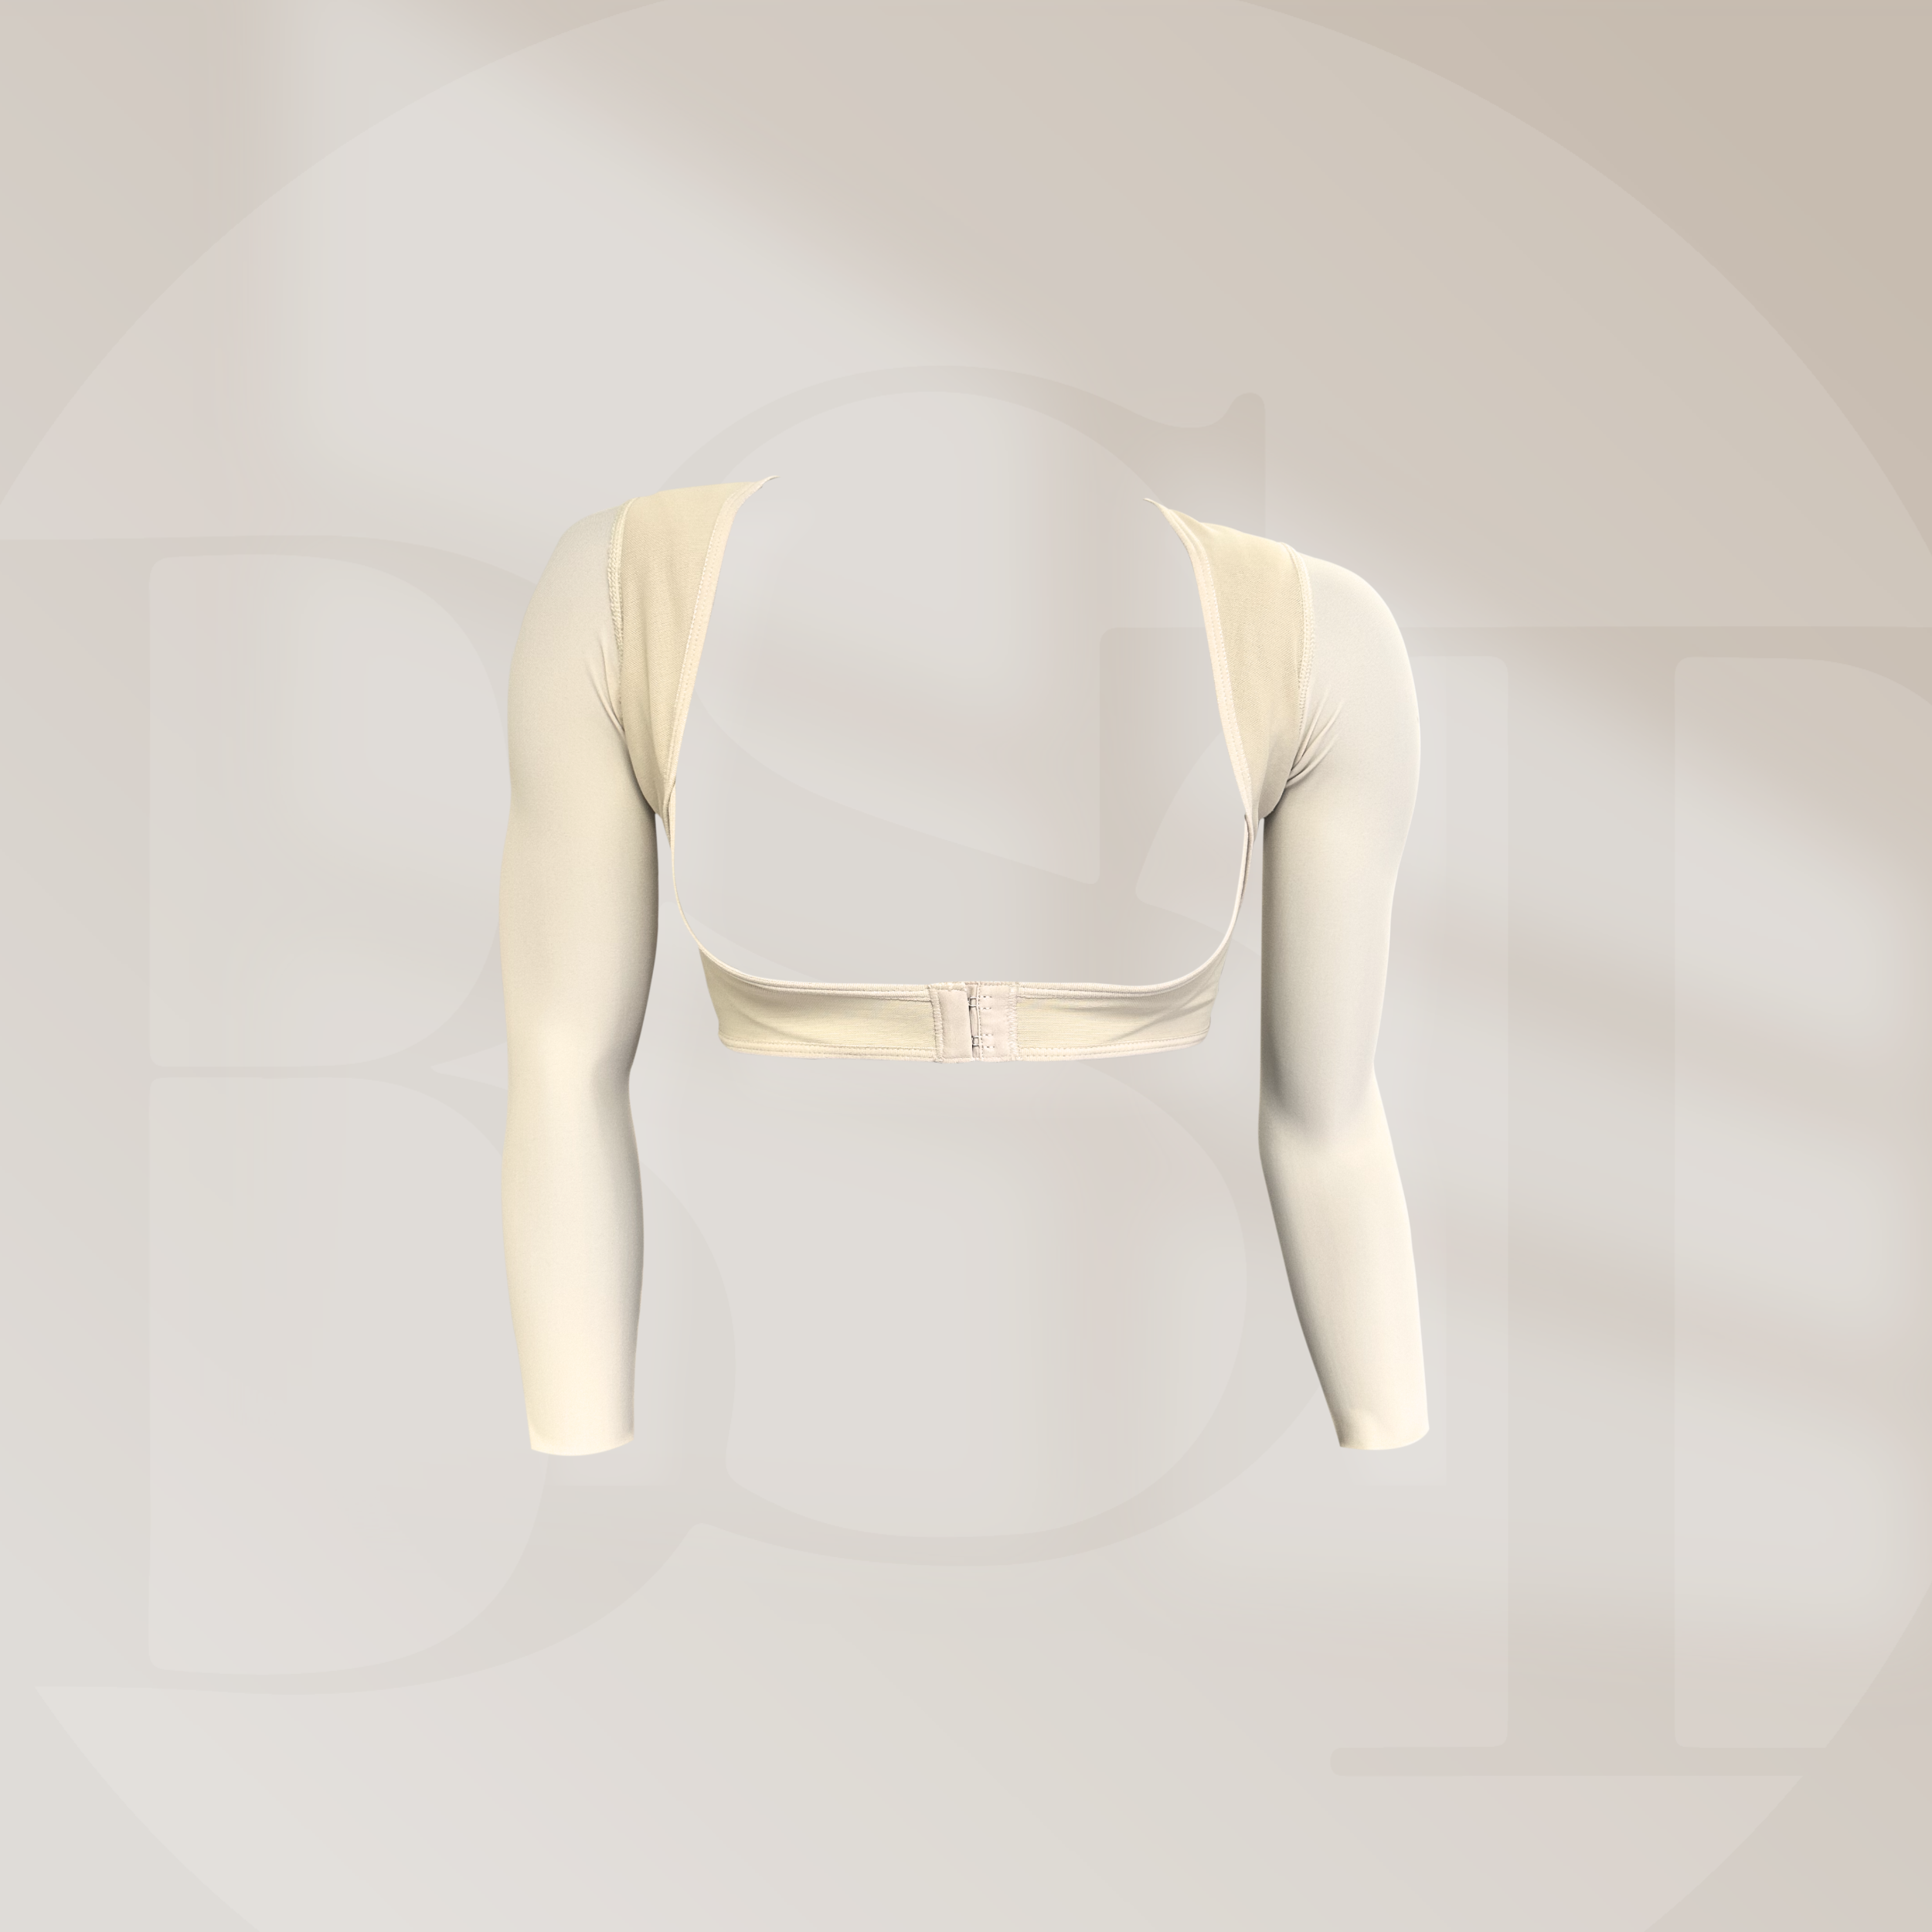 765 ARM COMPRESSION SLEEVE JACKET WITH FRONTAL HOOKS. – BST